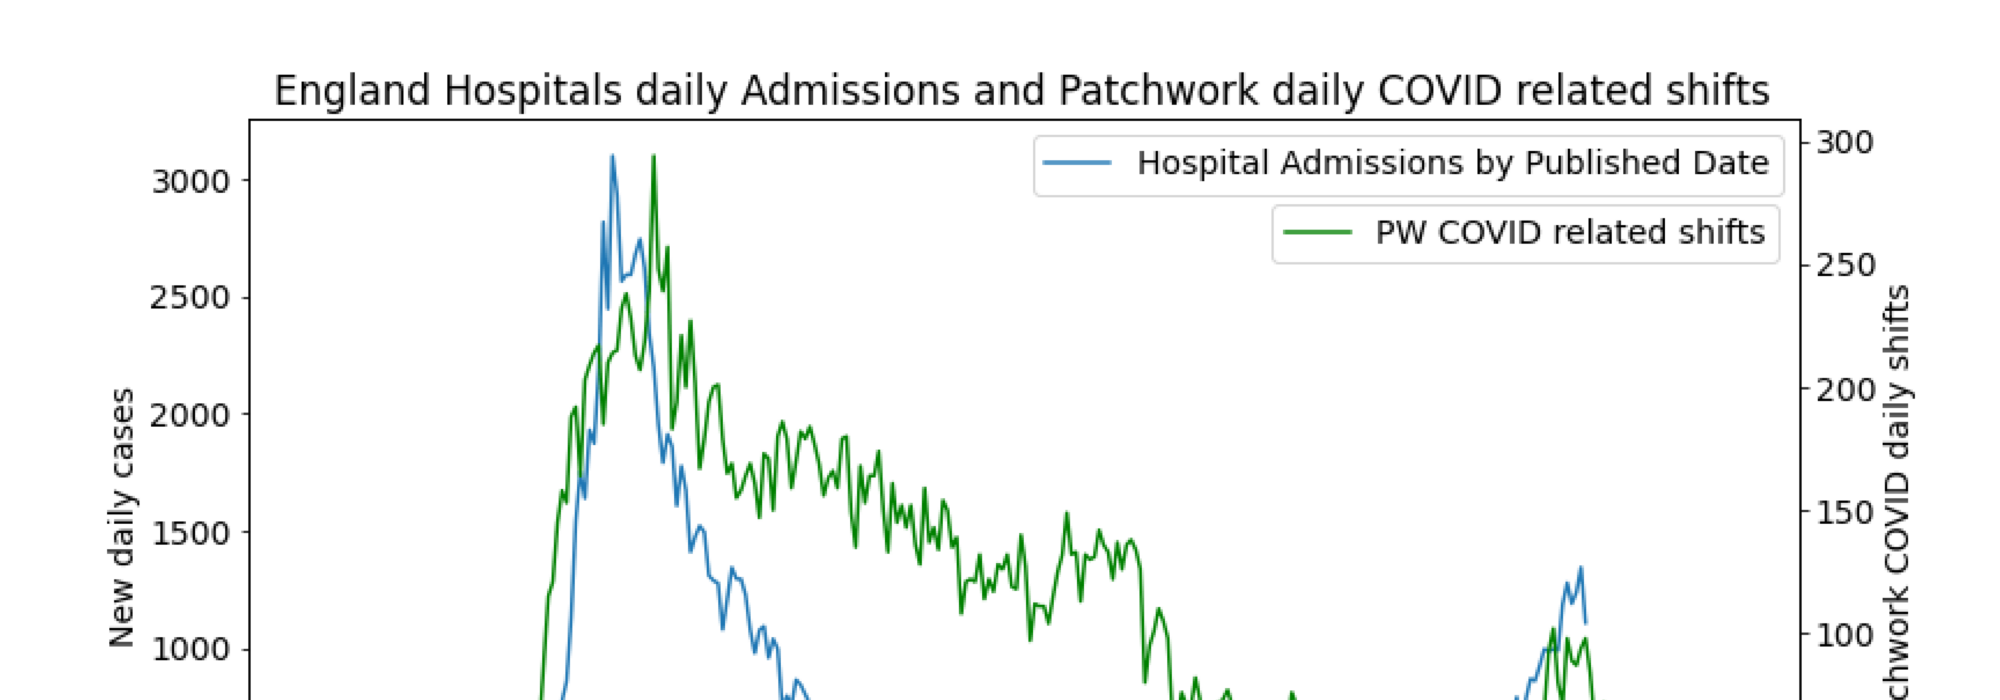 Graph from Patchwork Insights showing daily hospital admissions during the COVID-19 pandemic